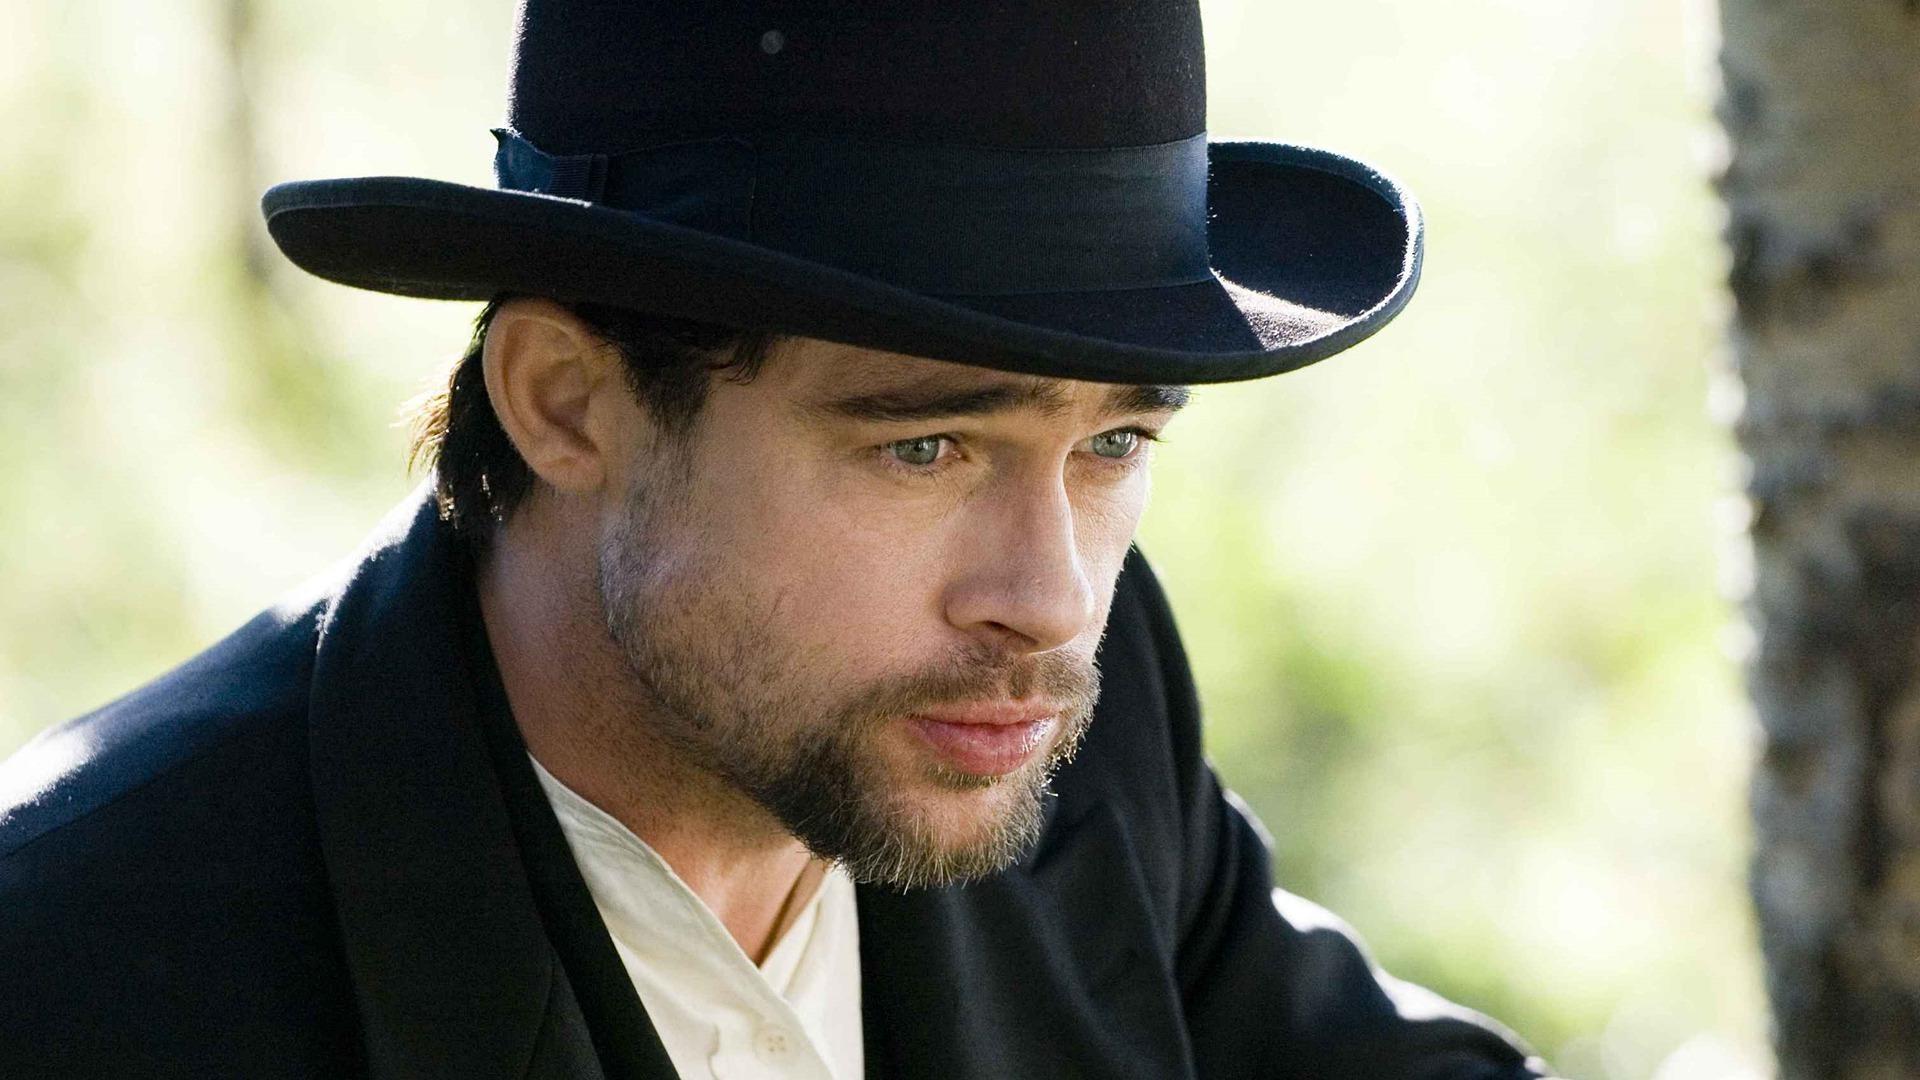 the assassination of jesse james by the coward robert ford